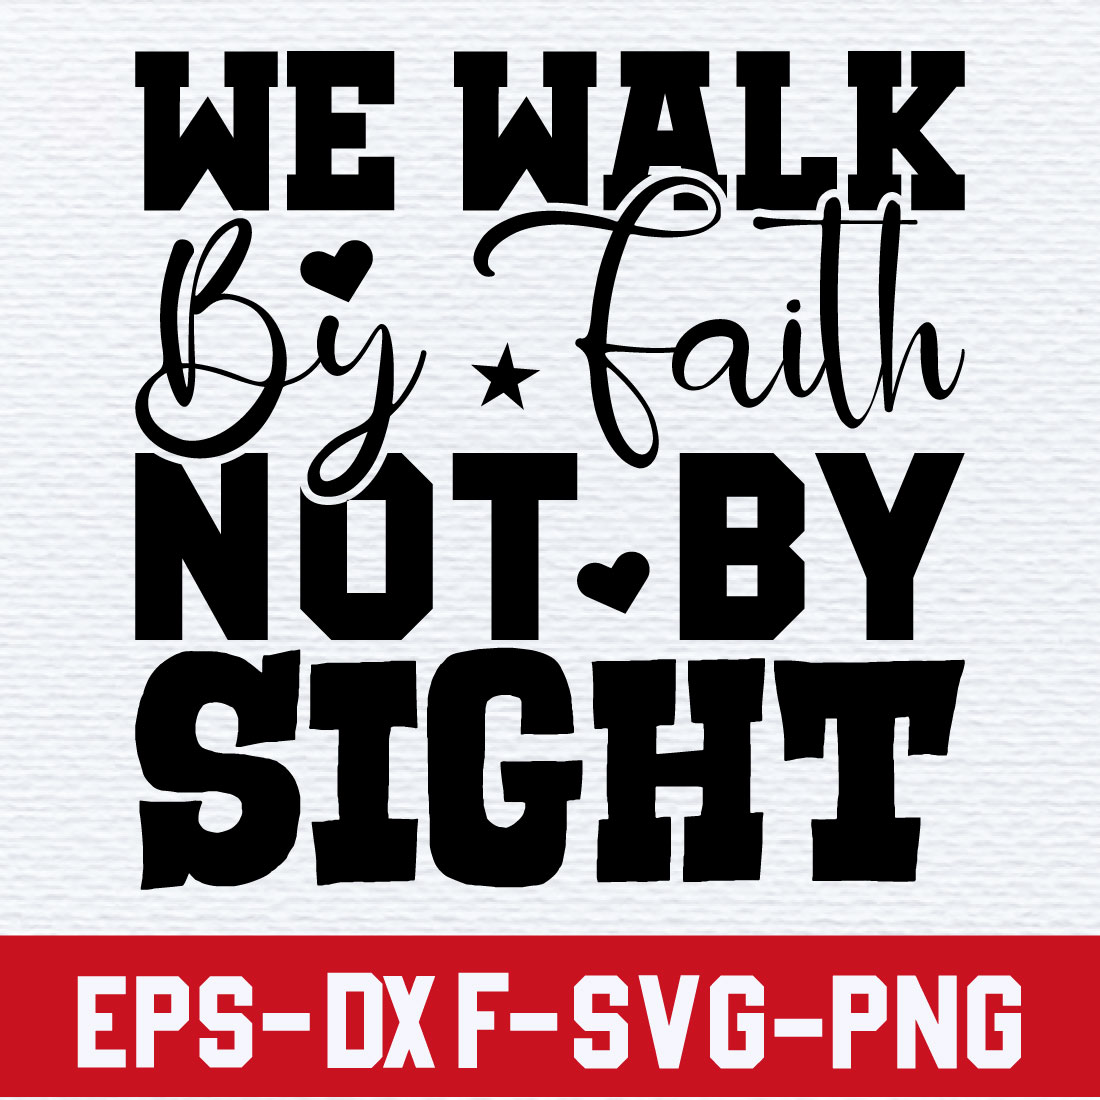 We walk by faith not by sight preview image.